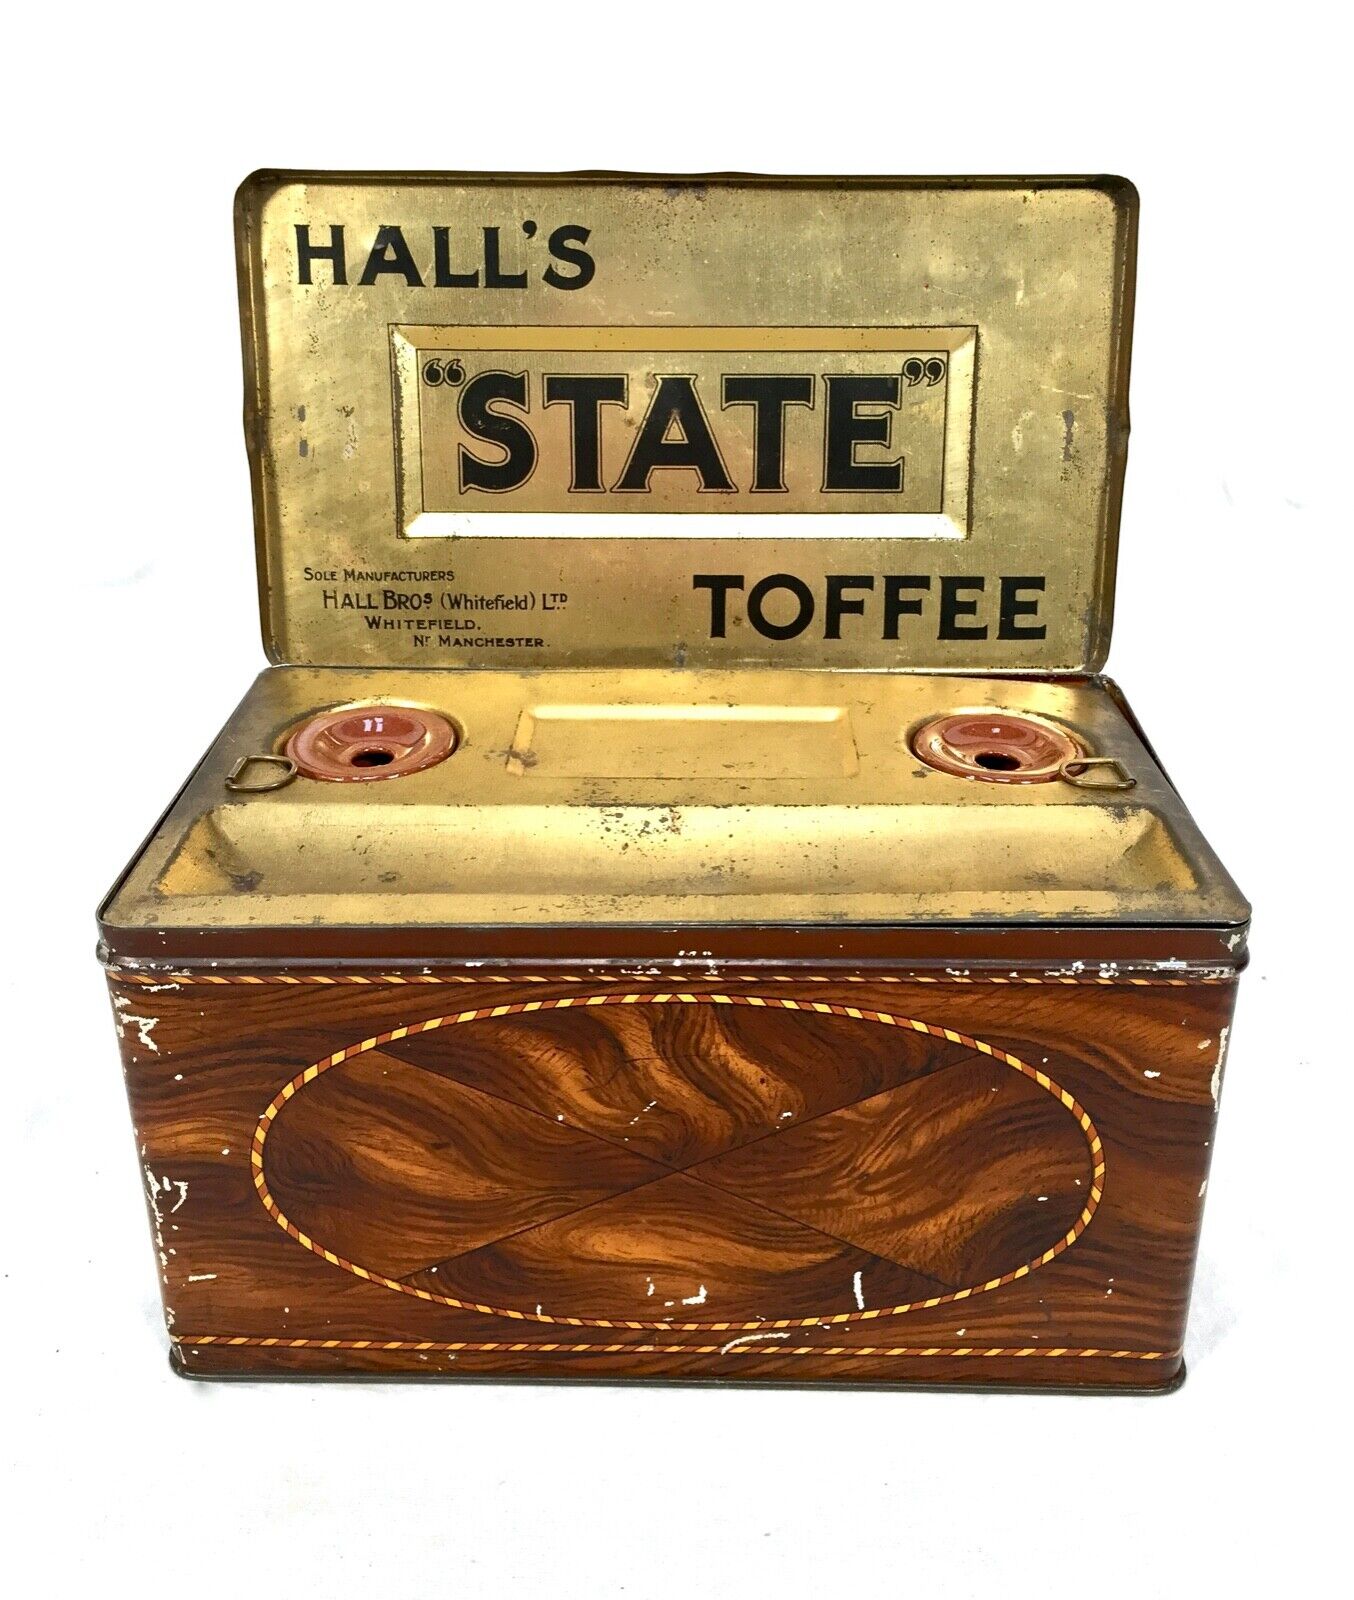 Antique Hall's 1920s Art Deco State Toffee Tin Box / Stationery Inkwell Holder